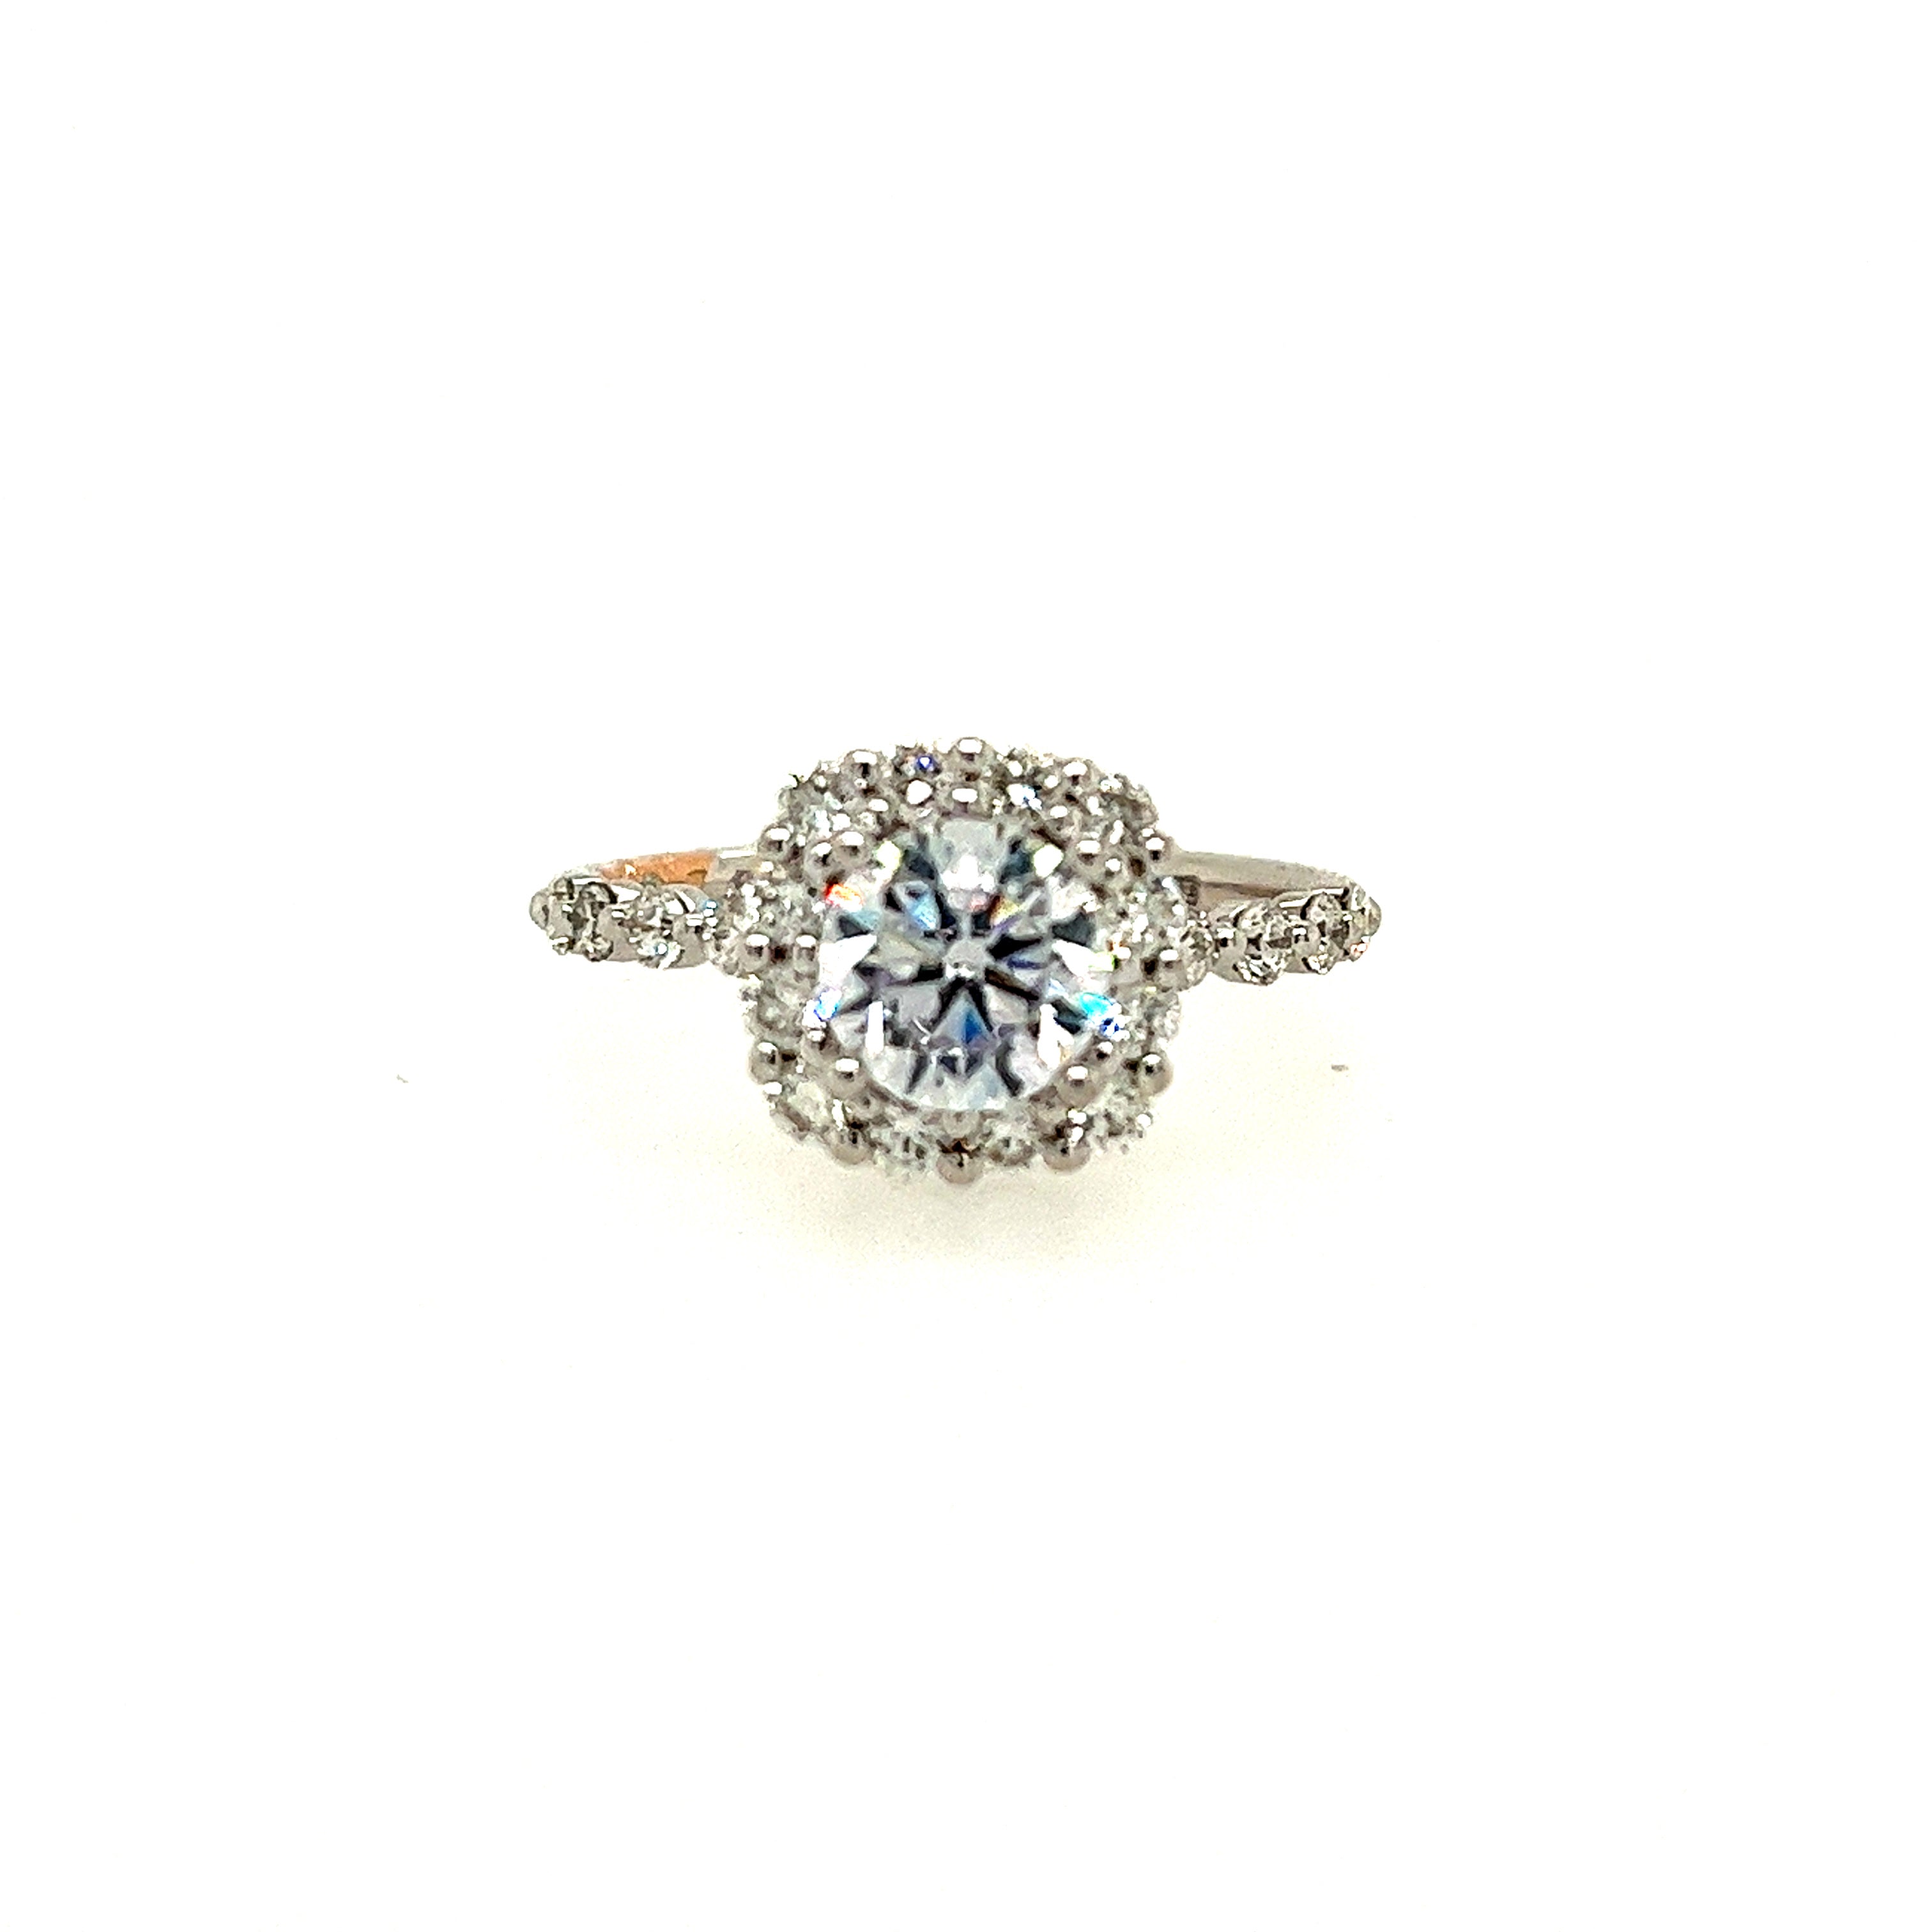 14K White And Rose Gold Halo Semi-Mount 
*center stone not included